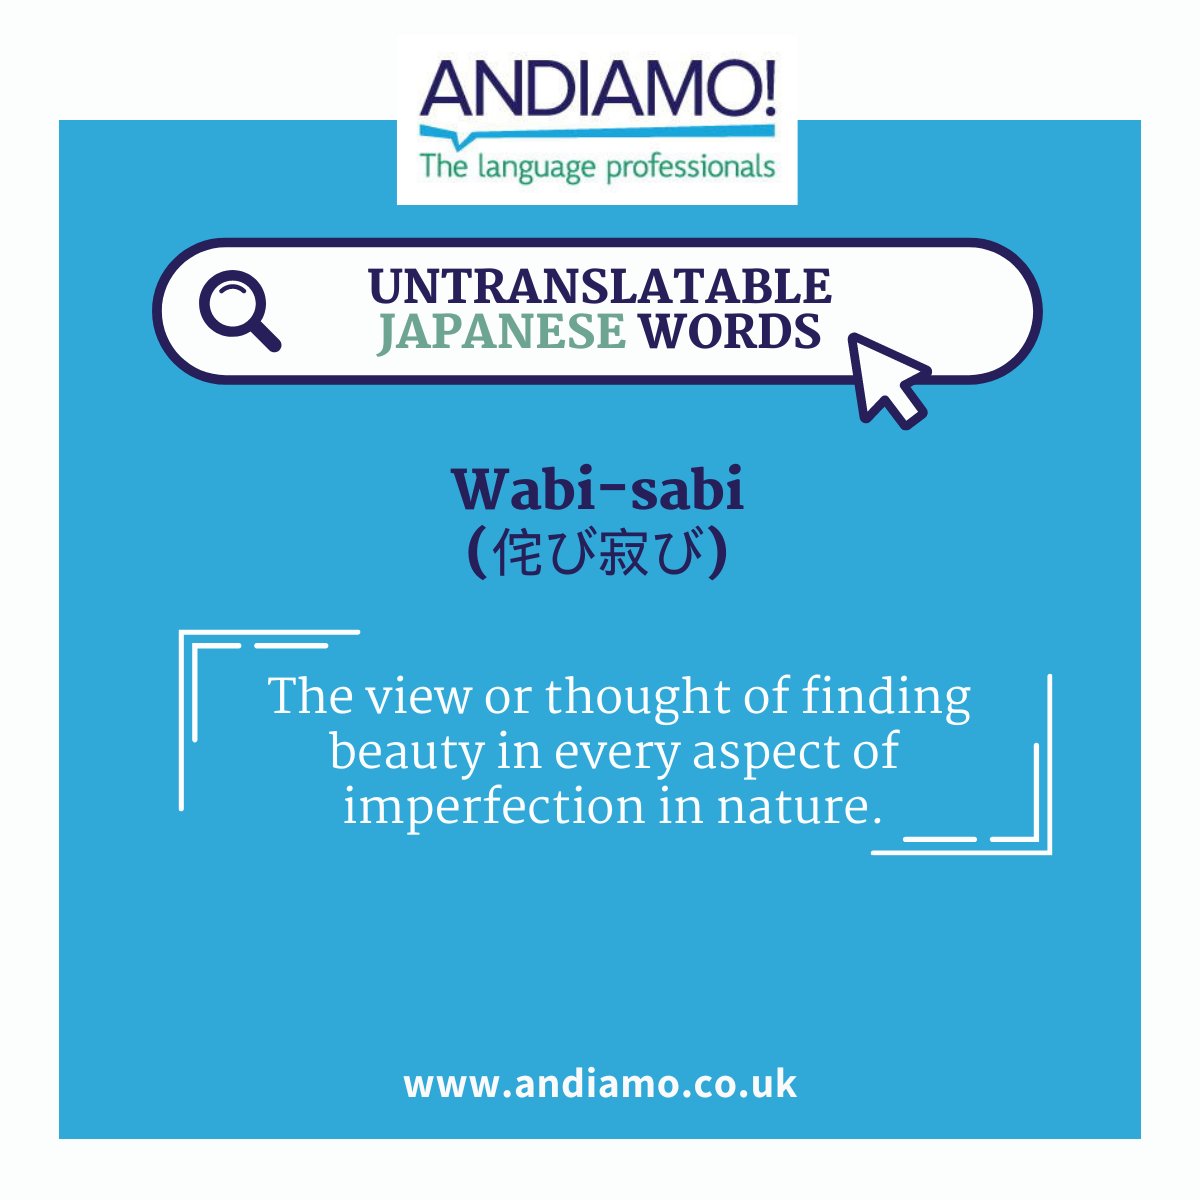 Untranslatable words always fascinate us here at Andiamo! because they often capture nuances or concepts that might not have direct equivalents in other languages.

#UntranslatableWords #TranslationServices